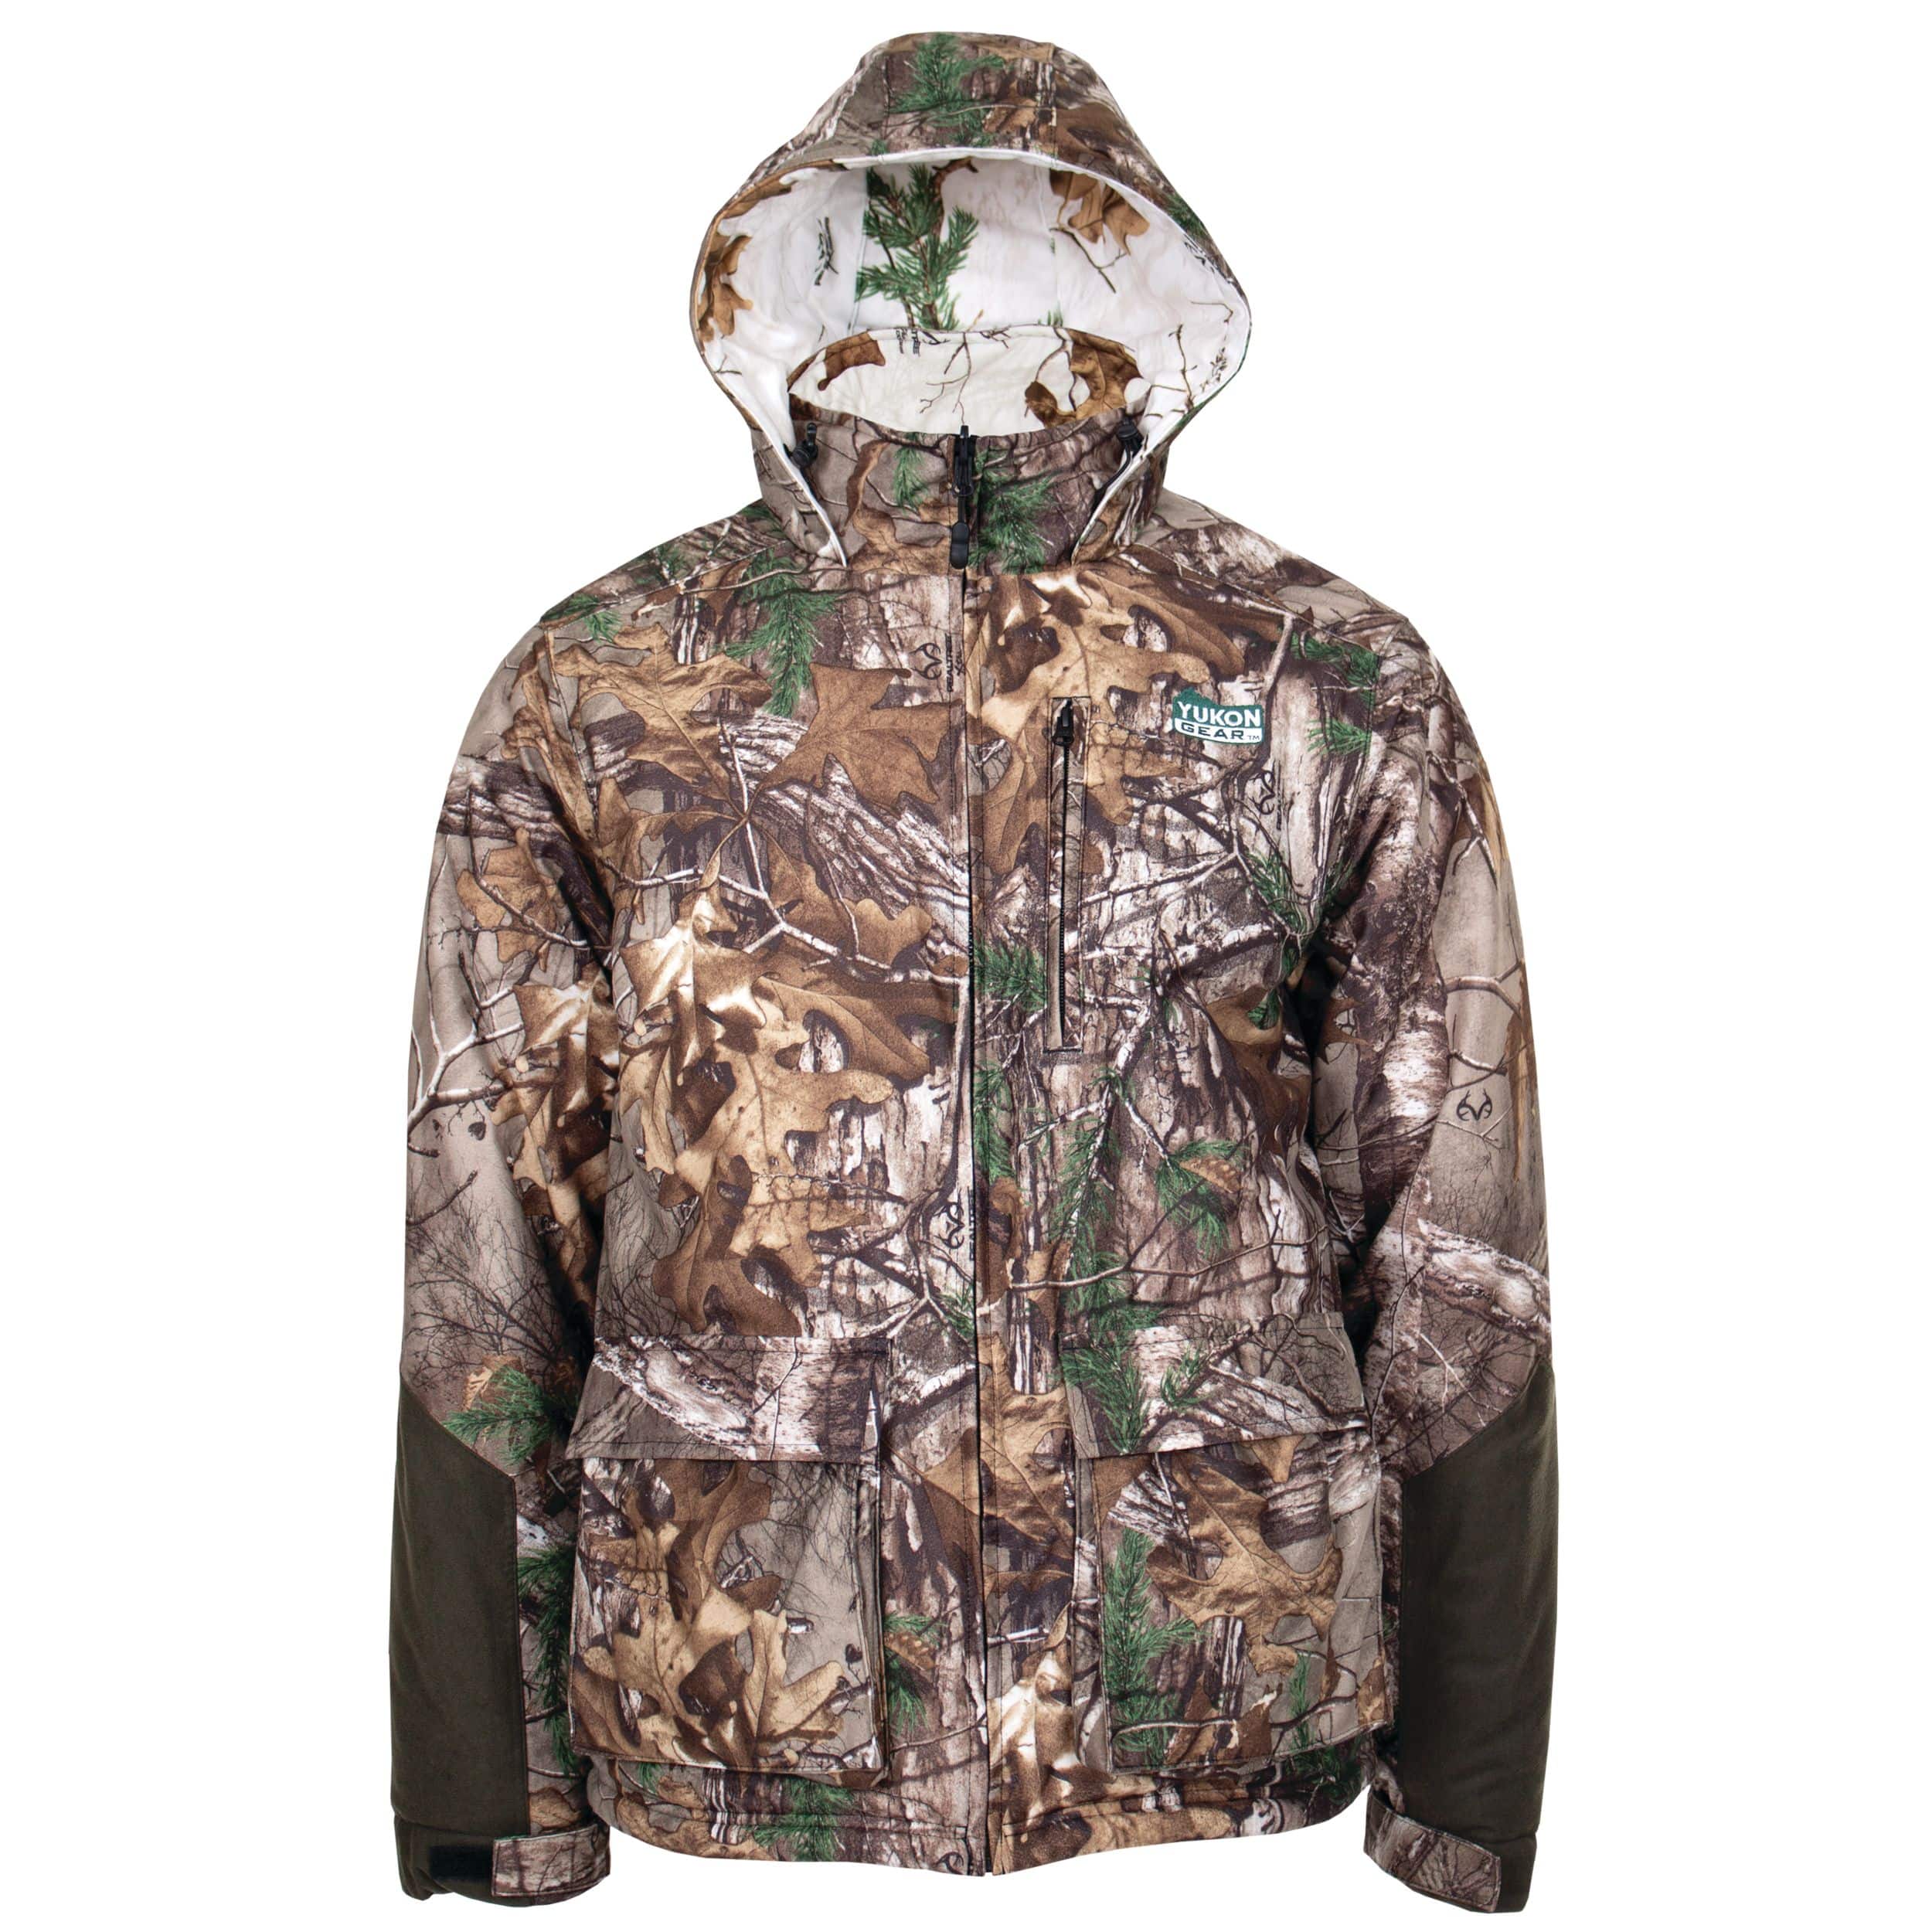 https://media-www.canadiantire.ca/product/playing/hunting/hunting-apparel-footwear/1759620/yukon-gear-reversible-parka-snow-to-real-tree-m-4c604187-fb5e-4022-a60c-6a116d2fed15-jpgrendition.jpg